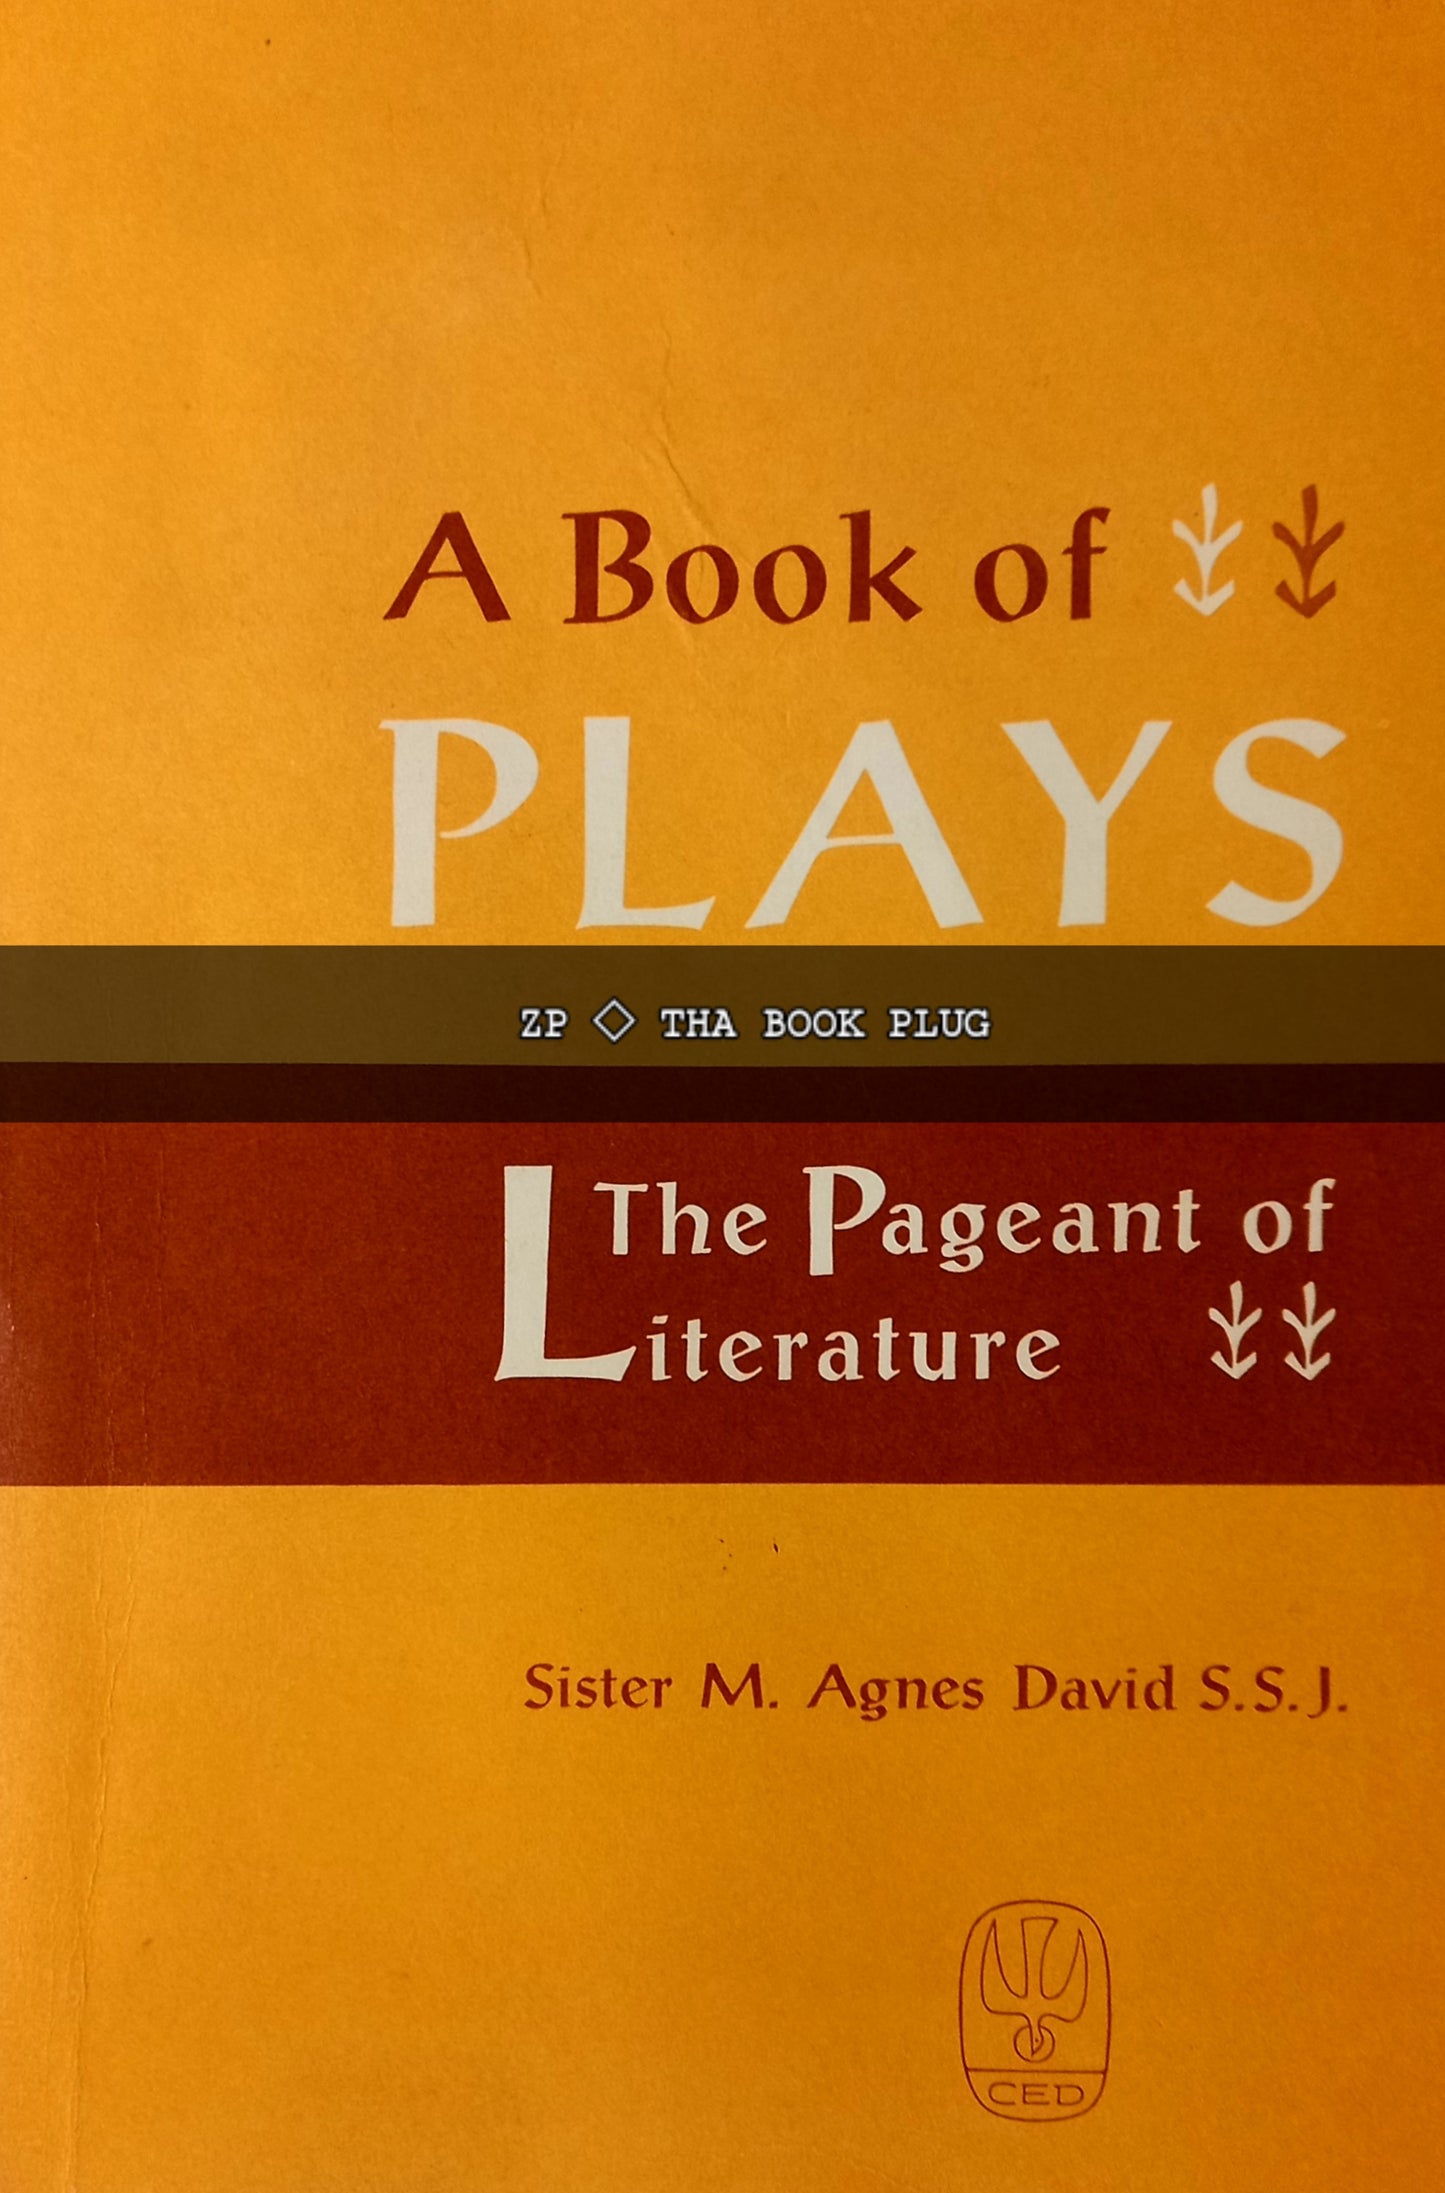 A Book of Plays: The Pageant of Literature